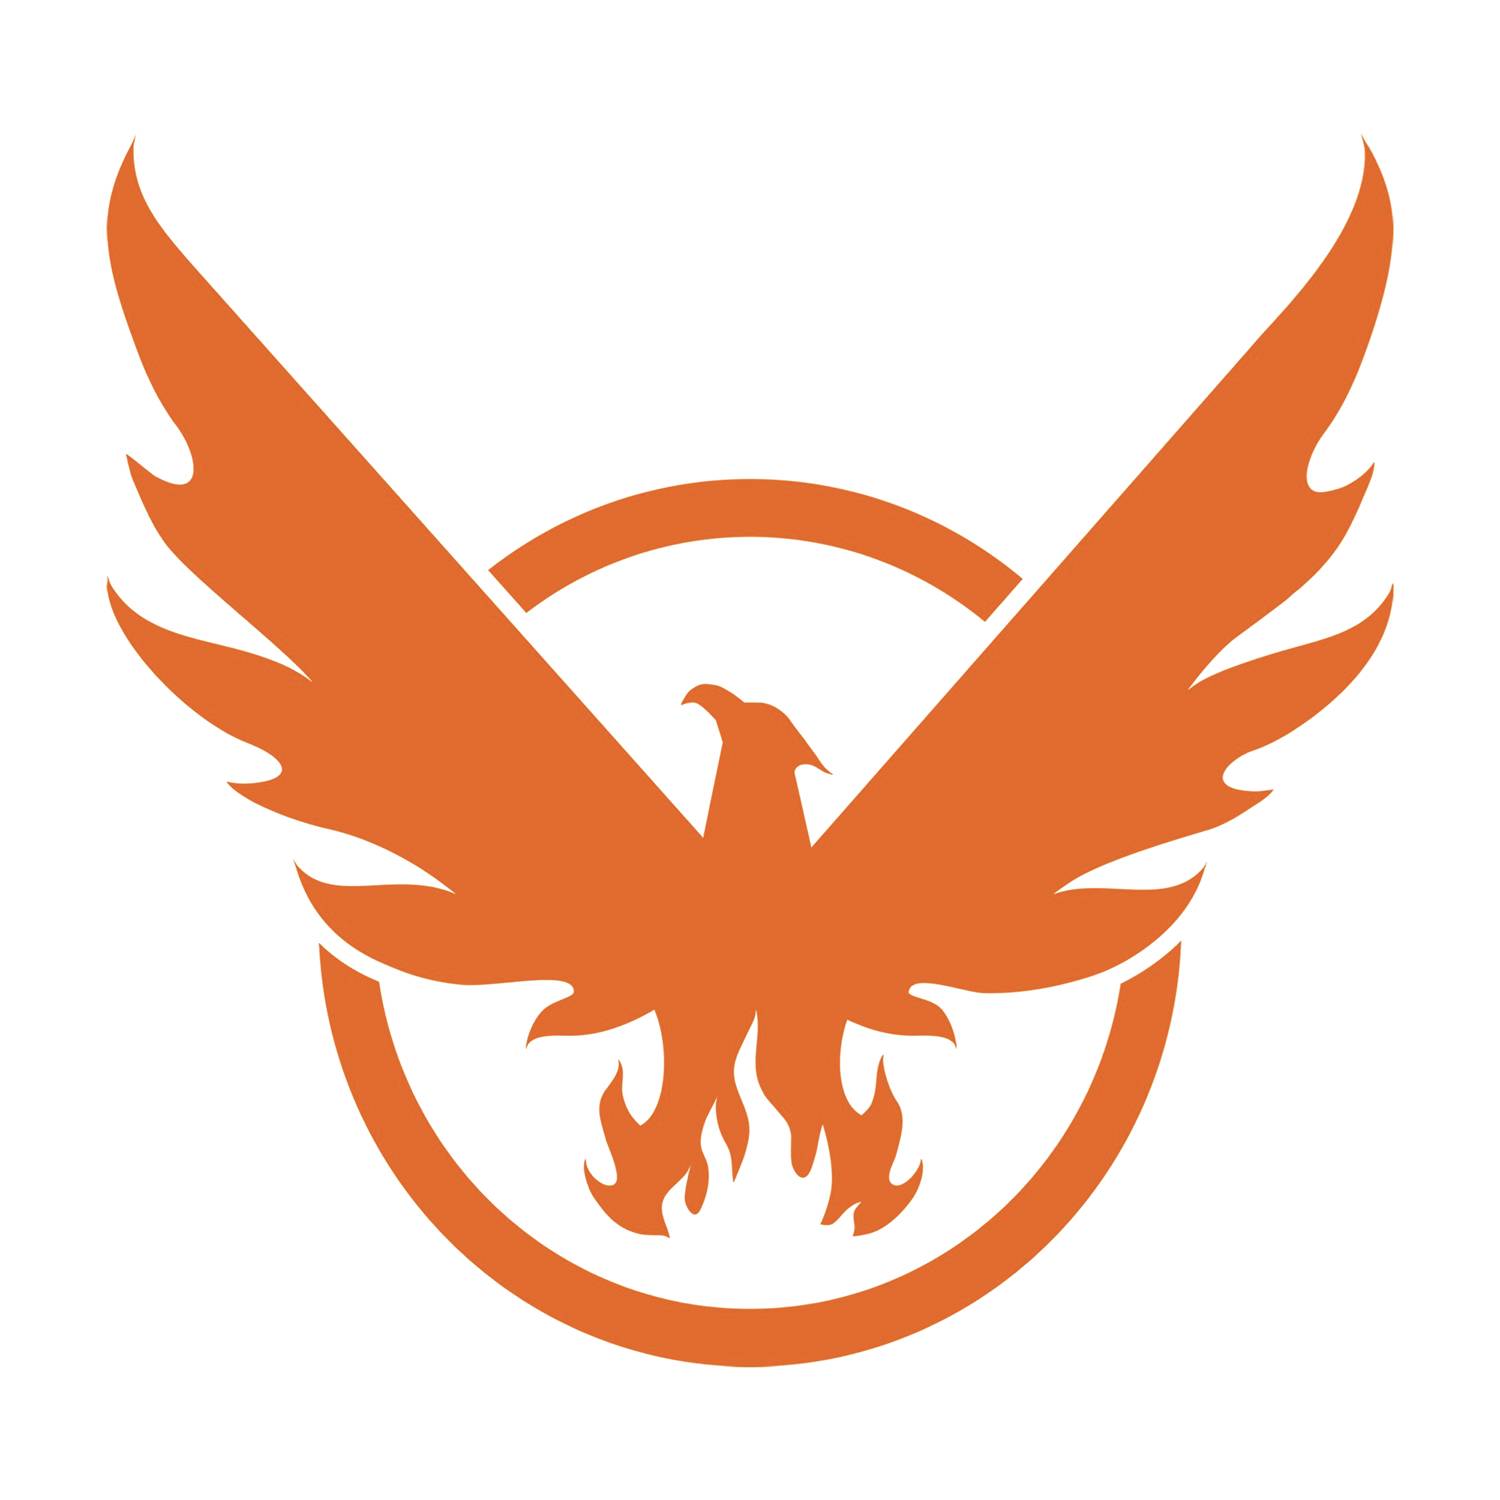 THE DIVISION 2 PHOENIX ON BOARD WINDOW DECAL